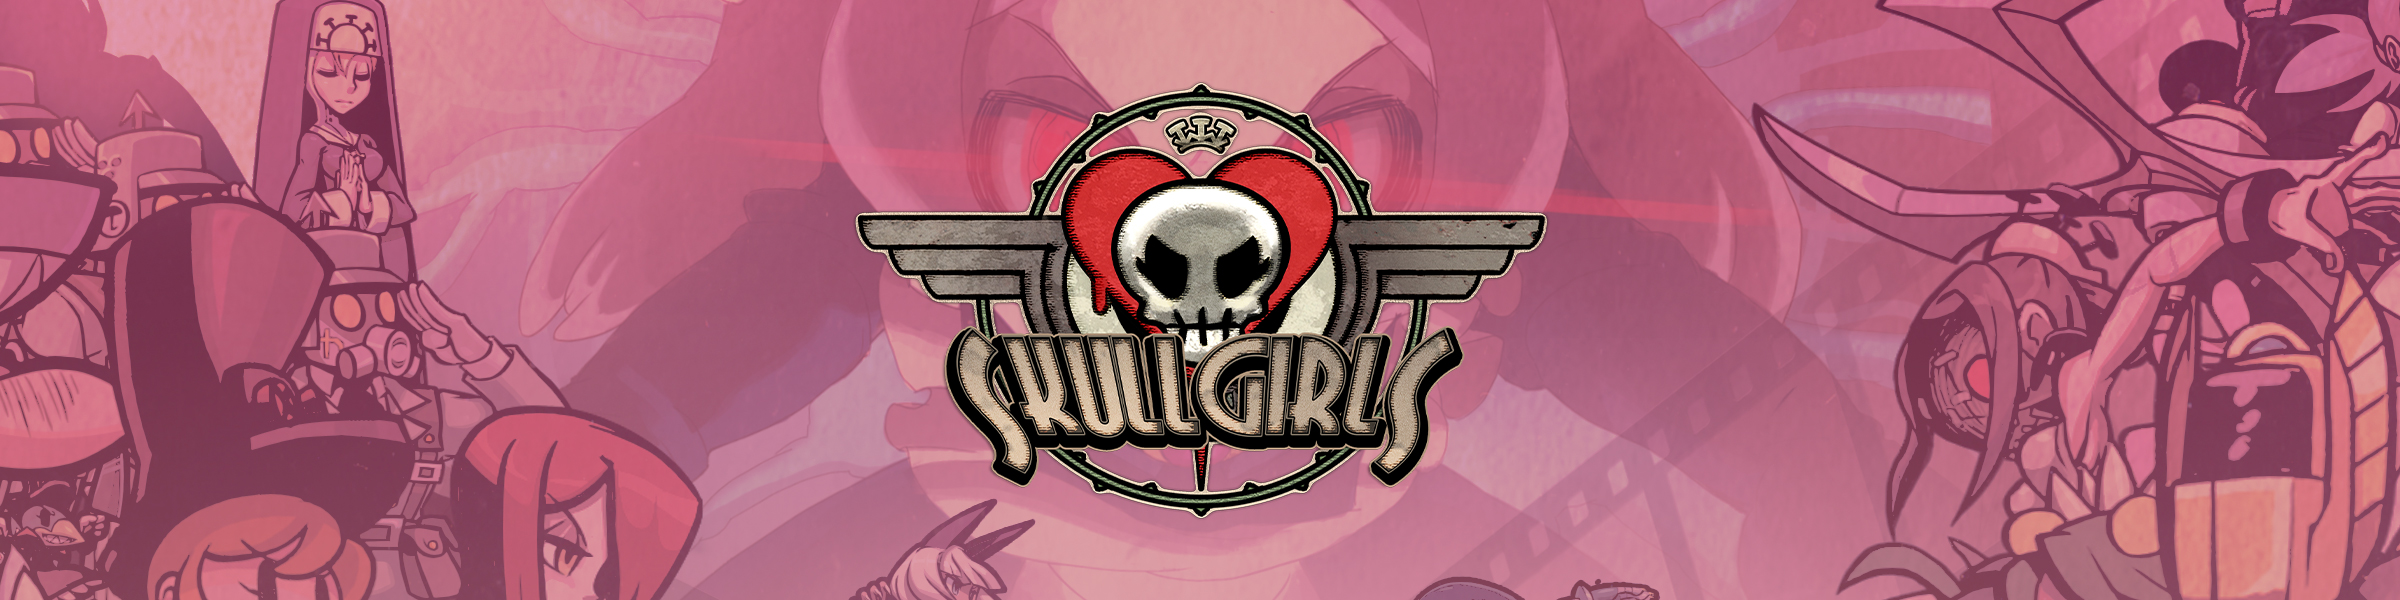 The Officially Licensed Skullgirls Collection